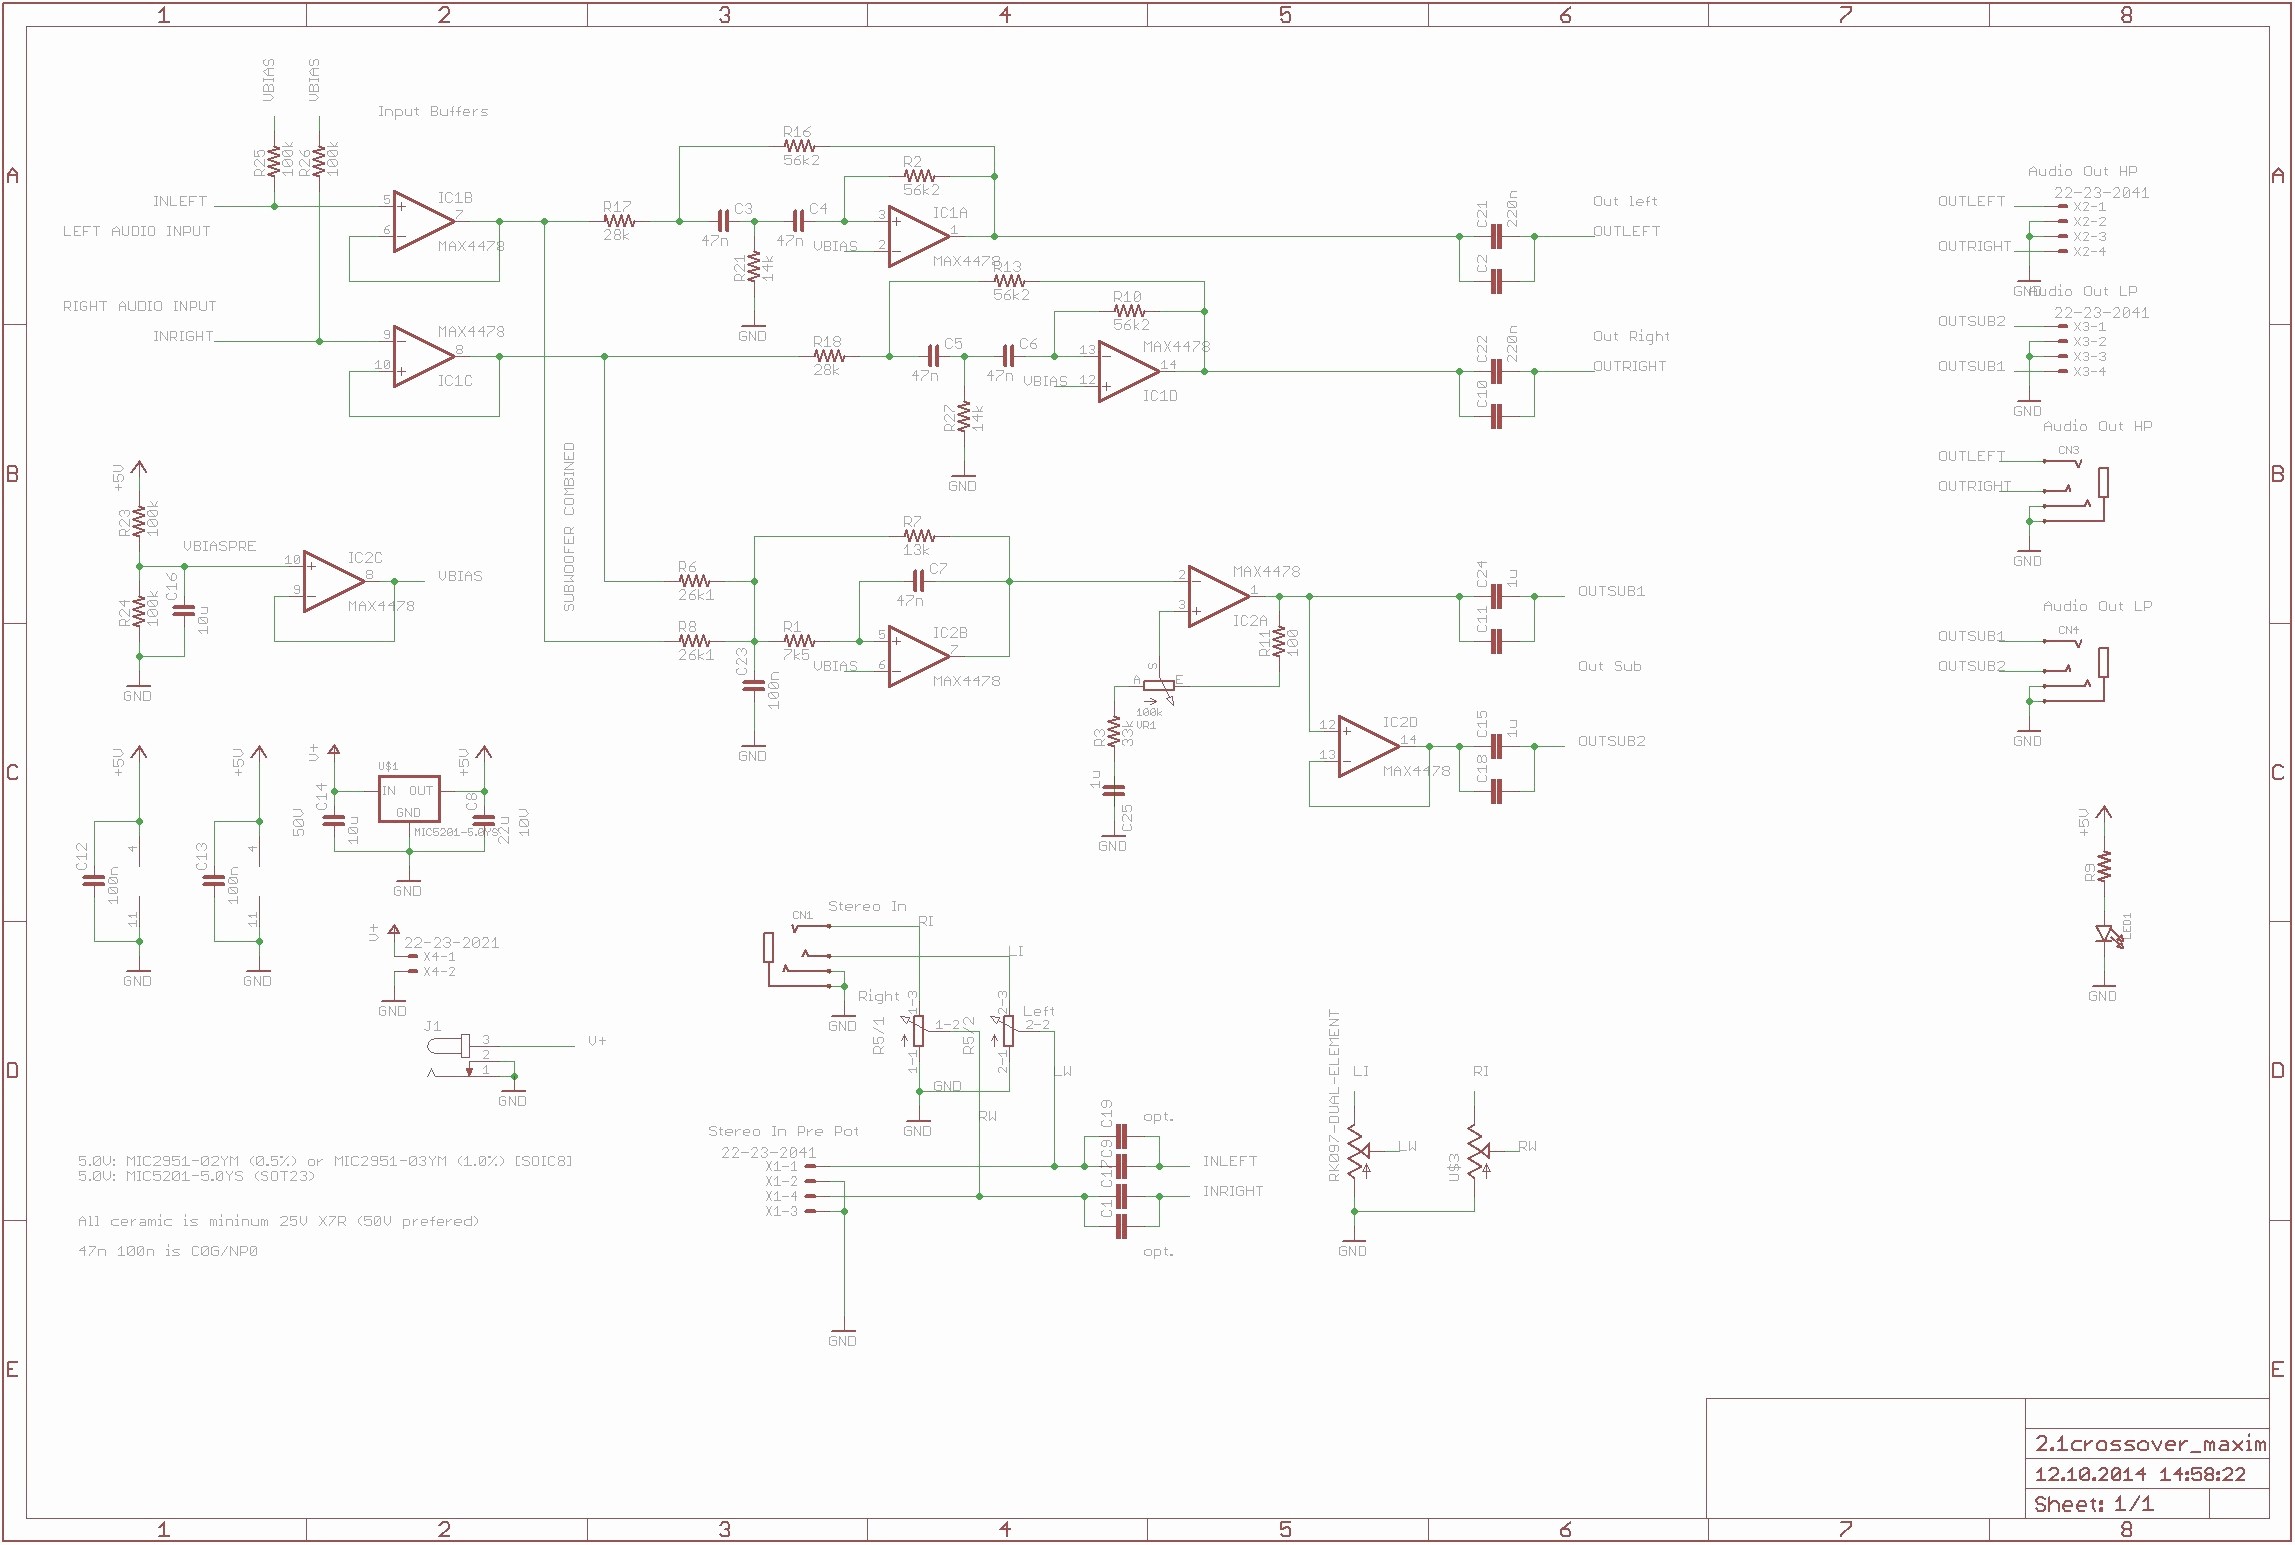 Wiring Diagram Wiring Diagram for thermostat Elegant Repair Guides 2 Wire thermostat Diagram